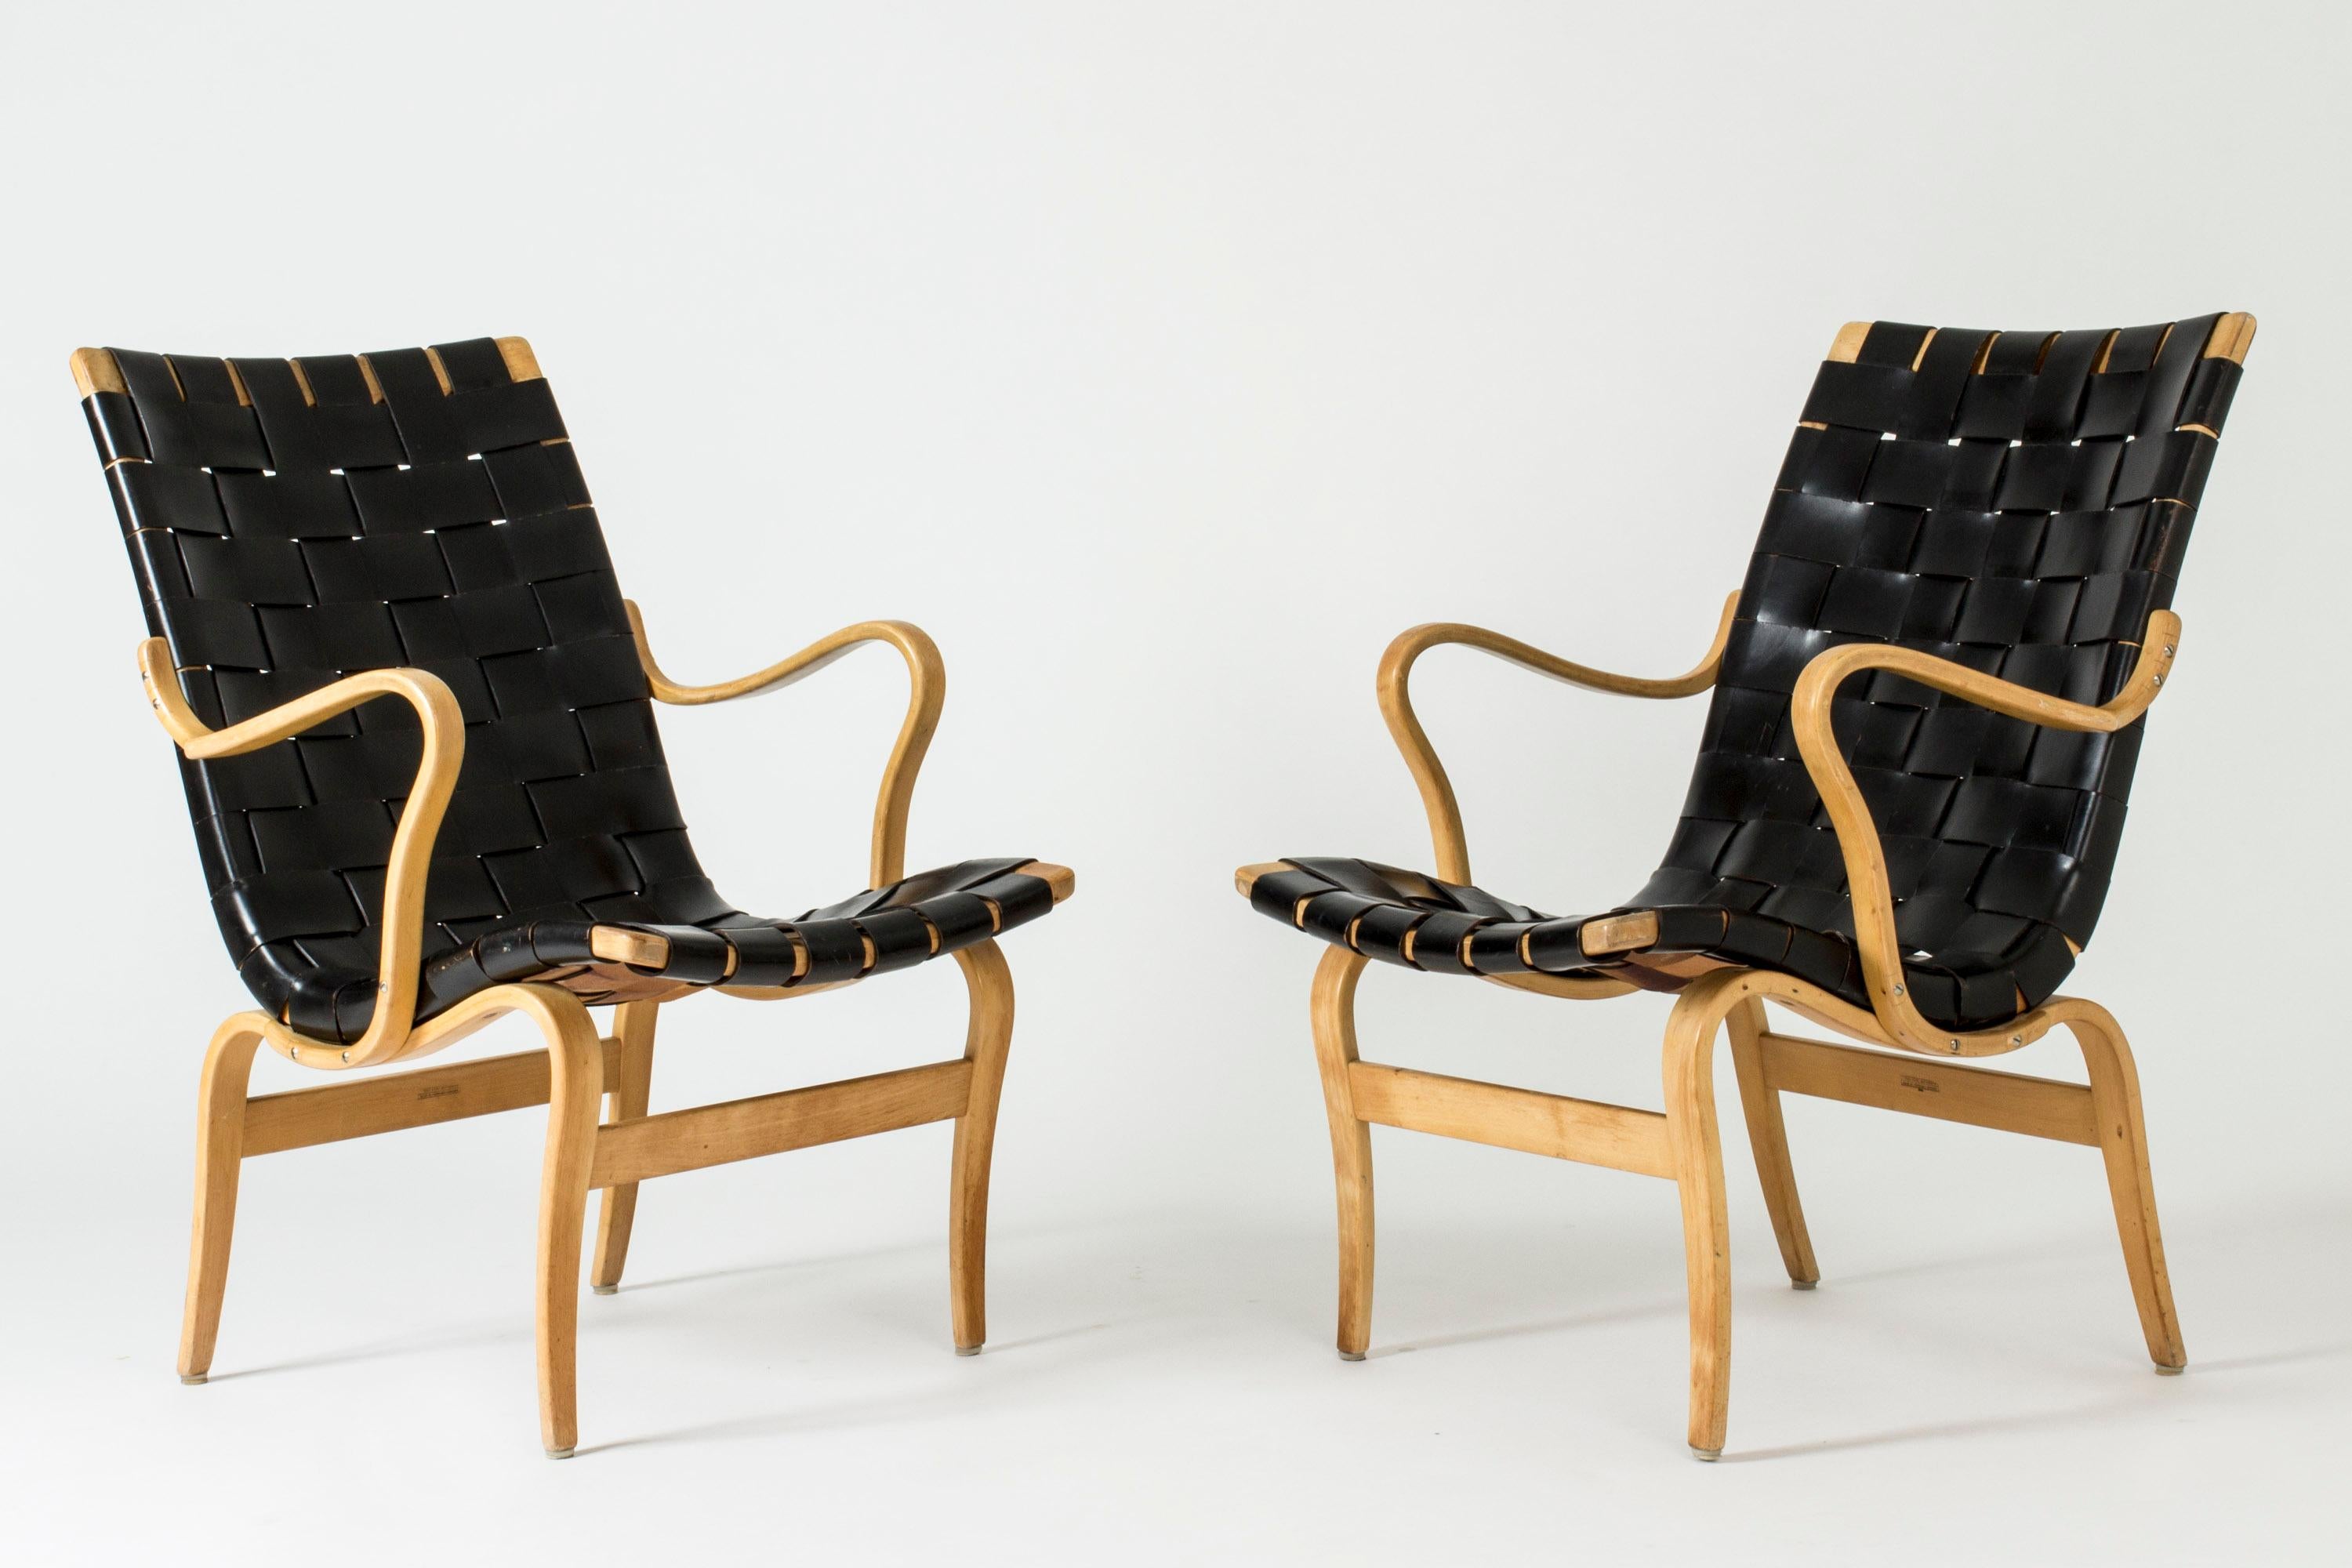 Pair of cool and comfy “Eva” lounge chairs, made from bentwood beech and wreathed black leather. Amazing silhouettes, beautifully aged leather.